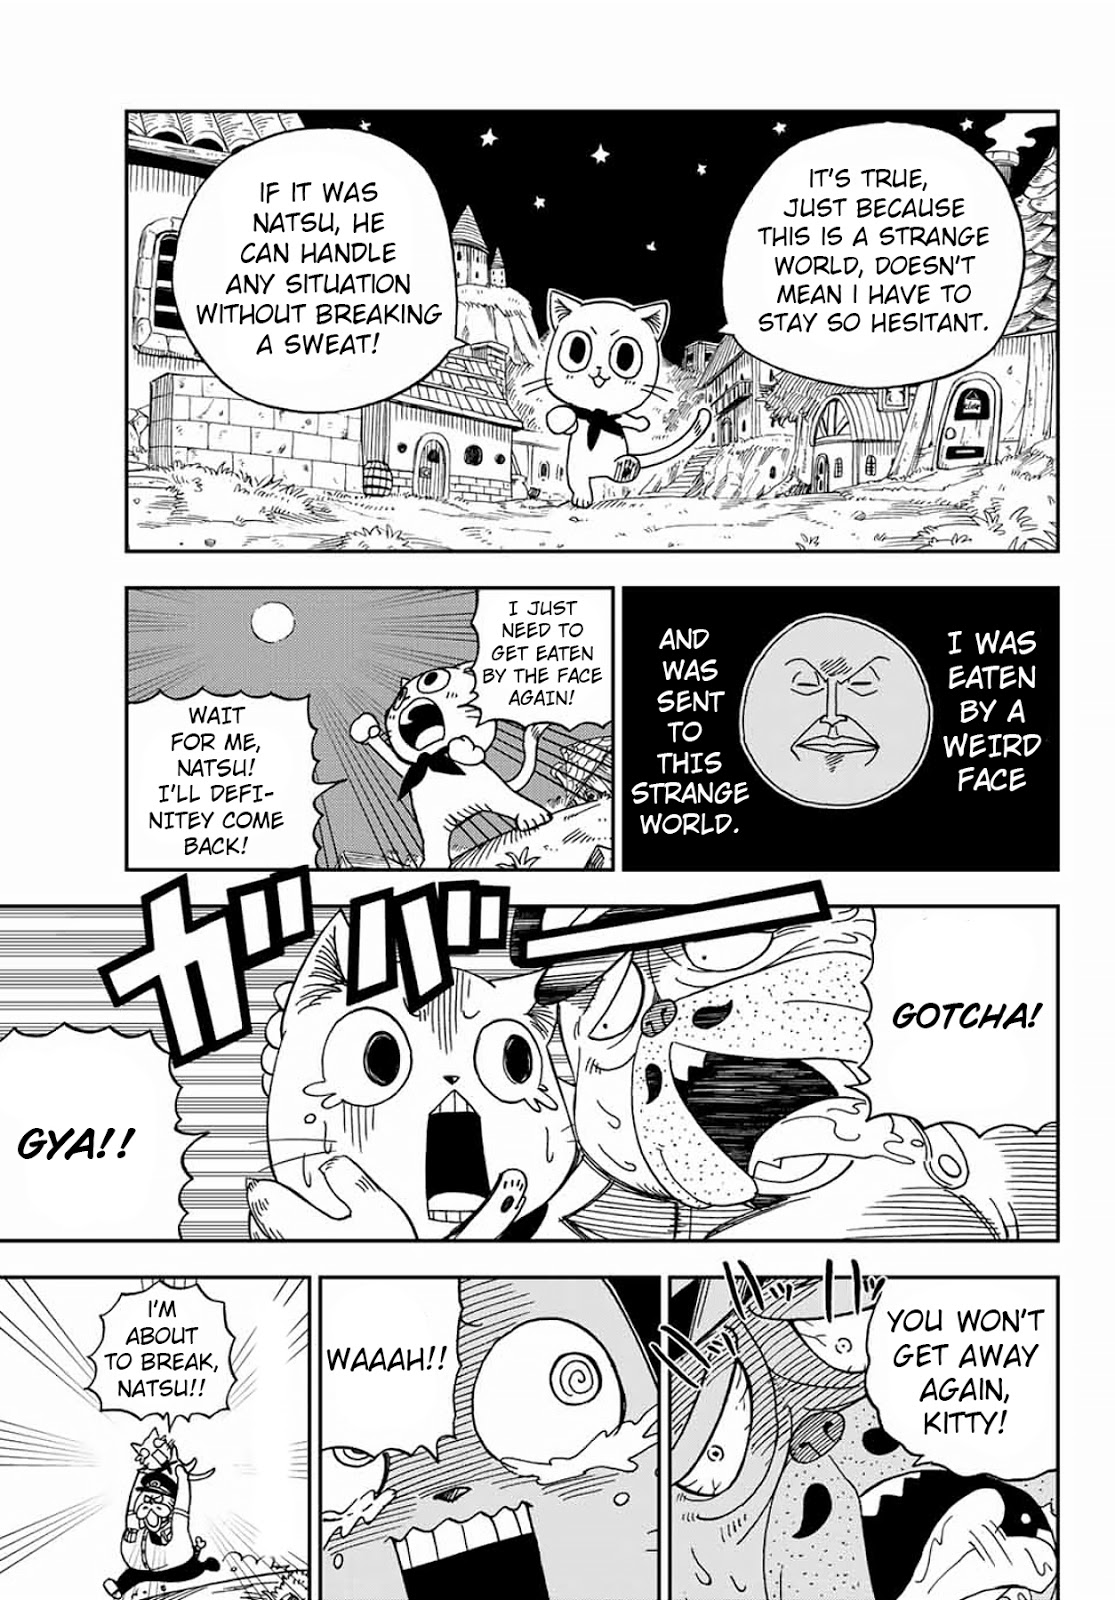 Fairy Tail: Happy's Great Adventure Vol. 1 Ch. 1